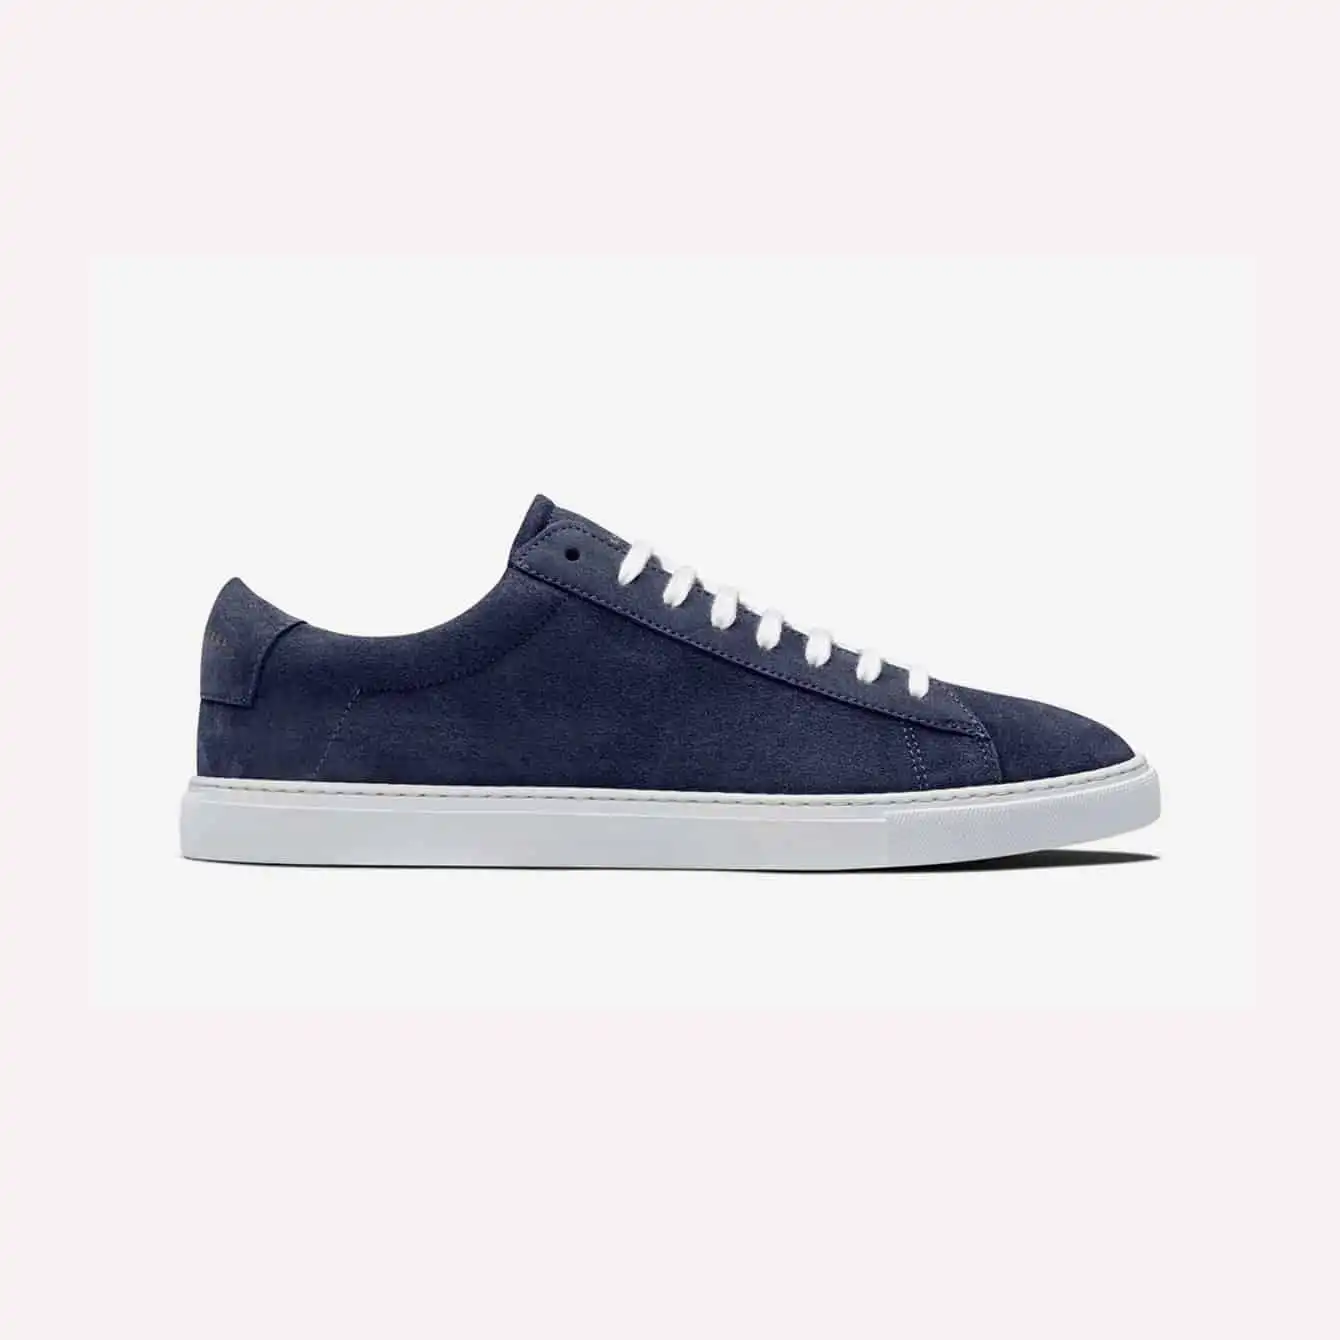 Oliver Cabell - Low 1 Navy Waxed